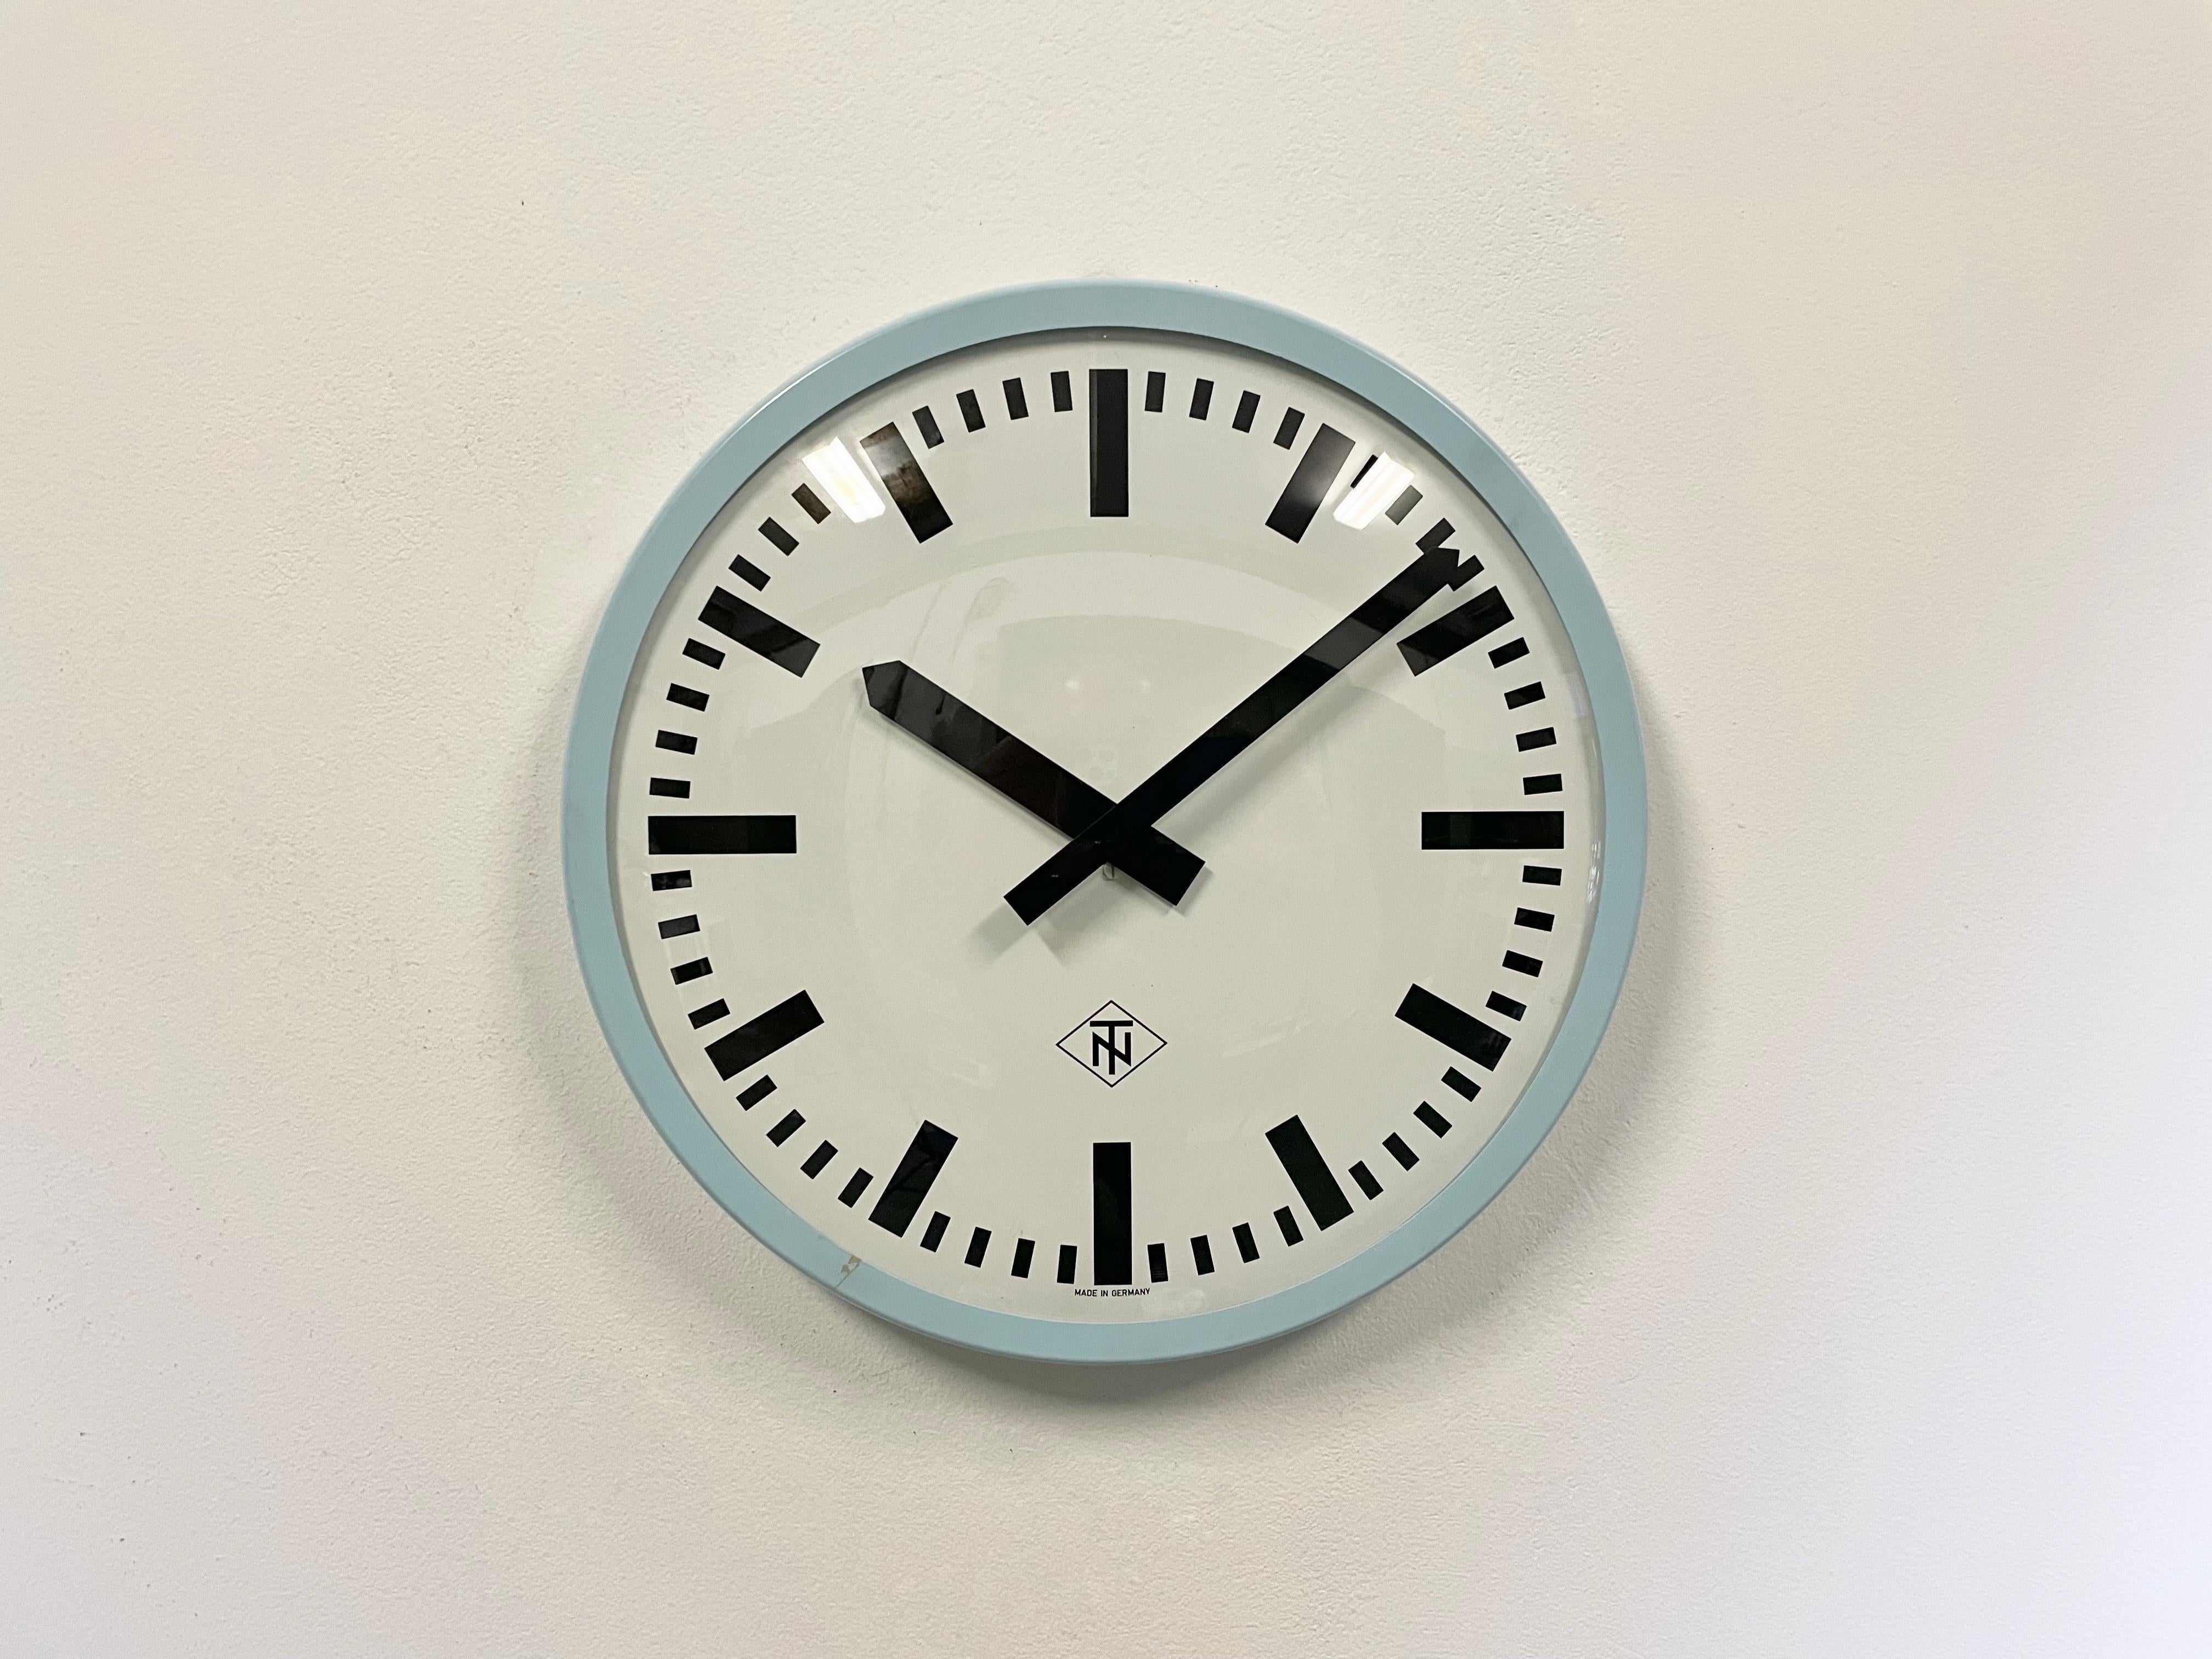 Wall clock produced by TN Telefonbau und Normalzeit in Germany during the 1960s. It features a blue bakelite frame, a white metal dial, an aluminium hands and a curved clear glass cover. The piece has been converted into a battery-powered clockwork